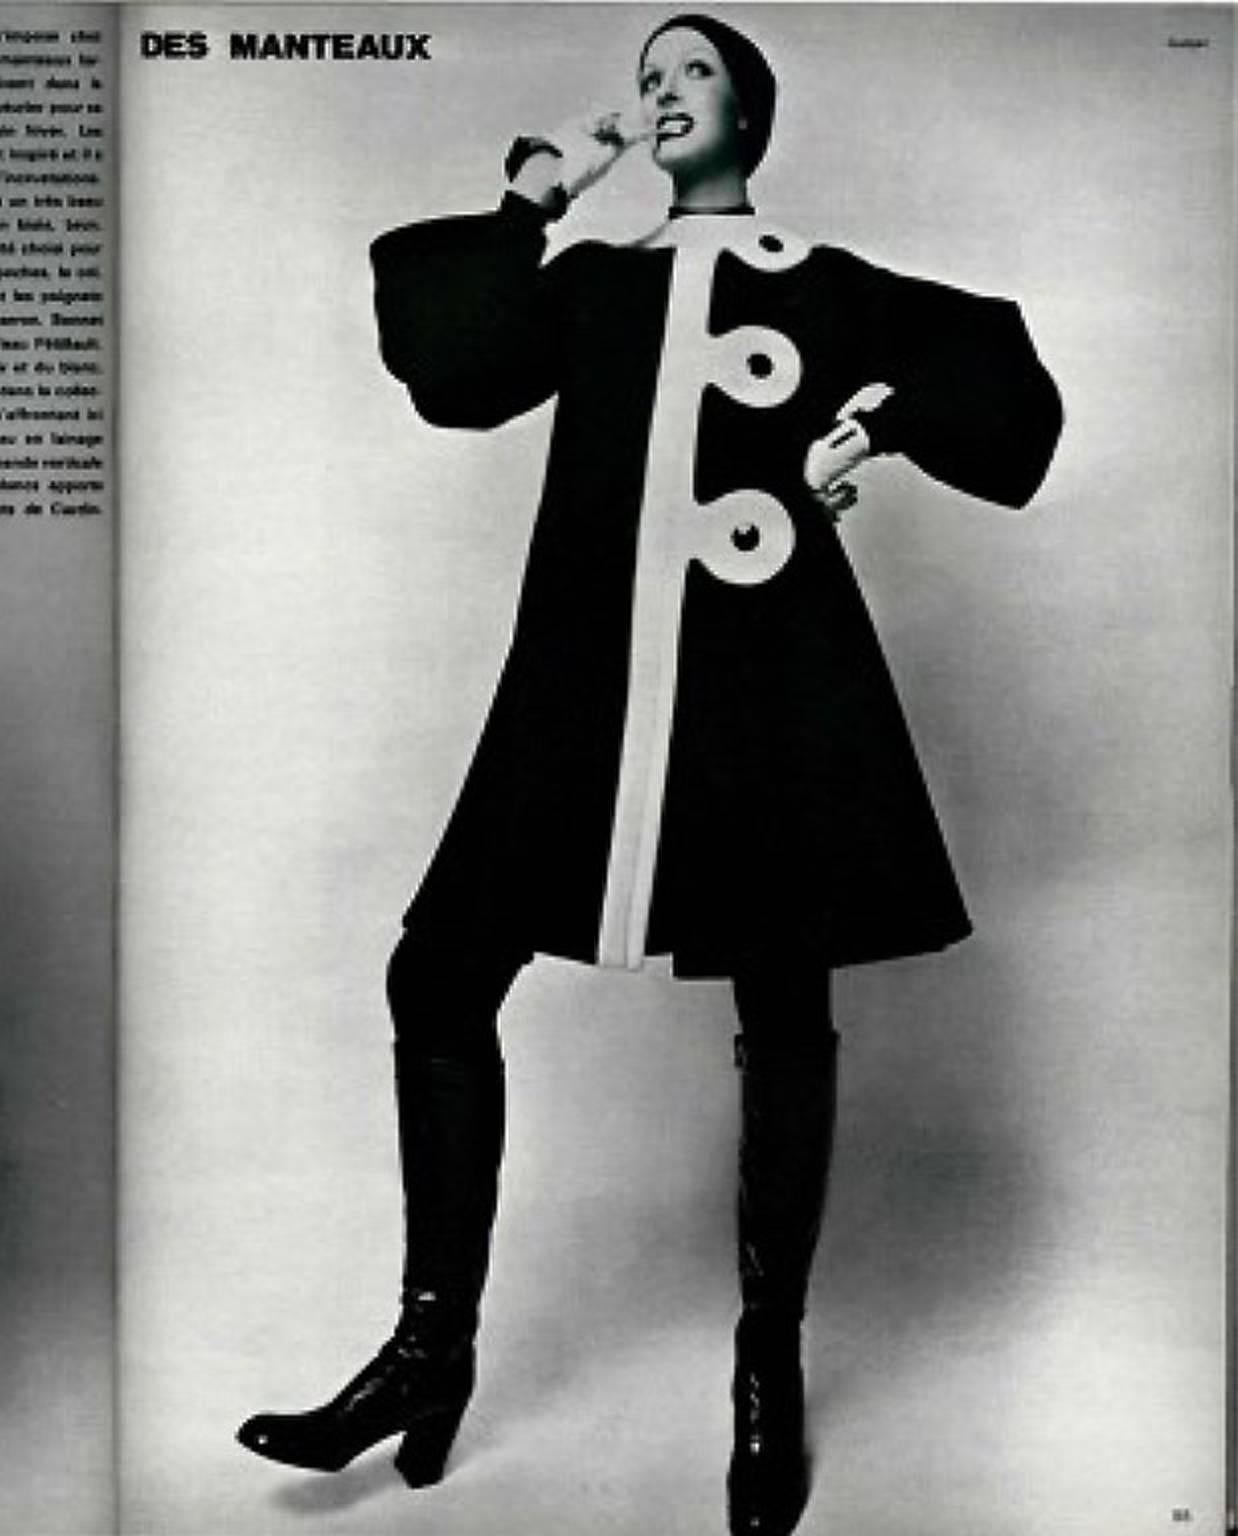 Breathtaking 1960's Pierre Cardin designer coat in a rich fully-lined black and ivory wool. In 1951 Cardin opened his own couture house and by 1957, he started a ready-to-wear line; a bold move for a French couturier at the time. The look most